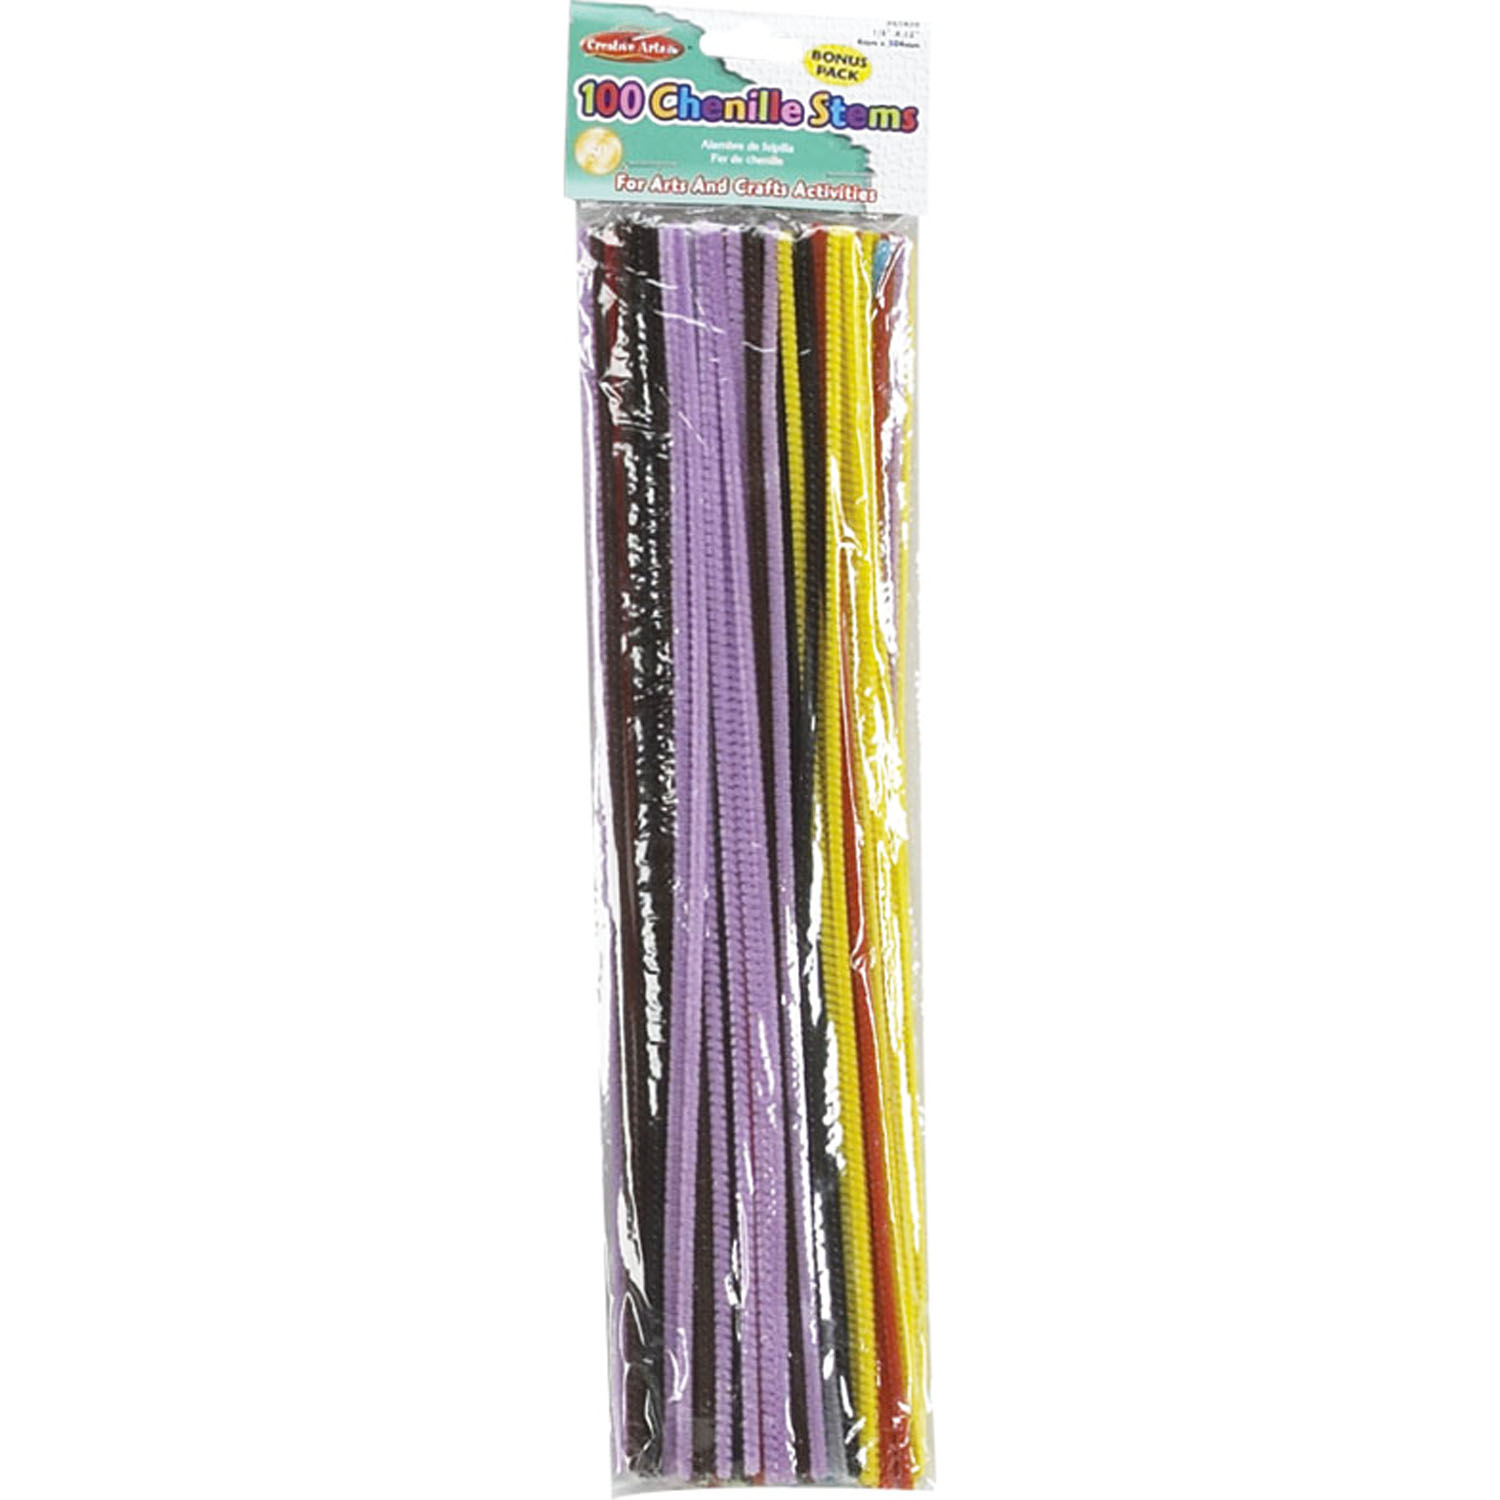 Creative Arts Chenille Stems, 4mm x 12", Assorted Colors, Bag of 100